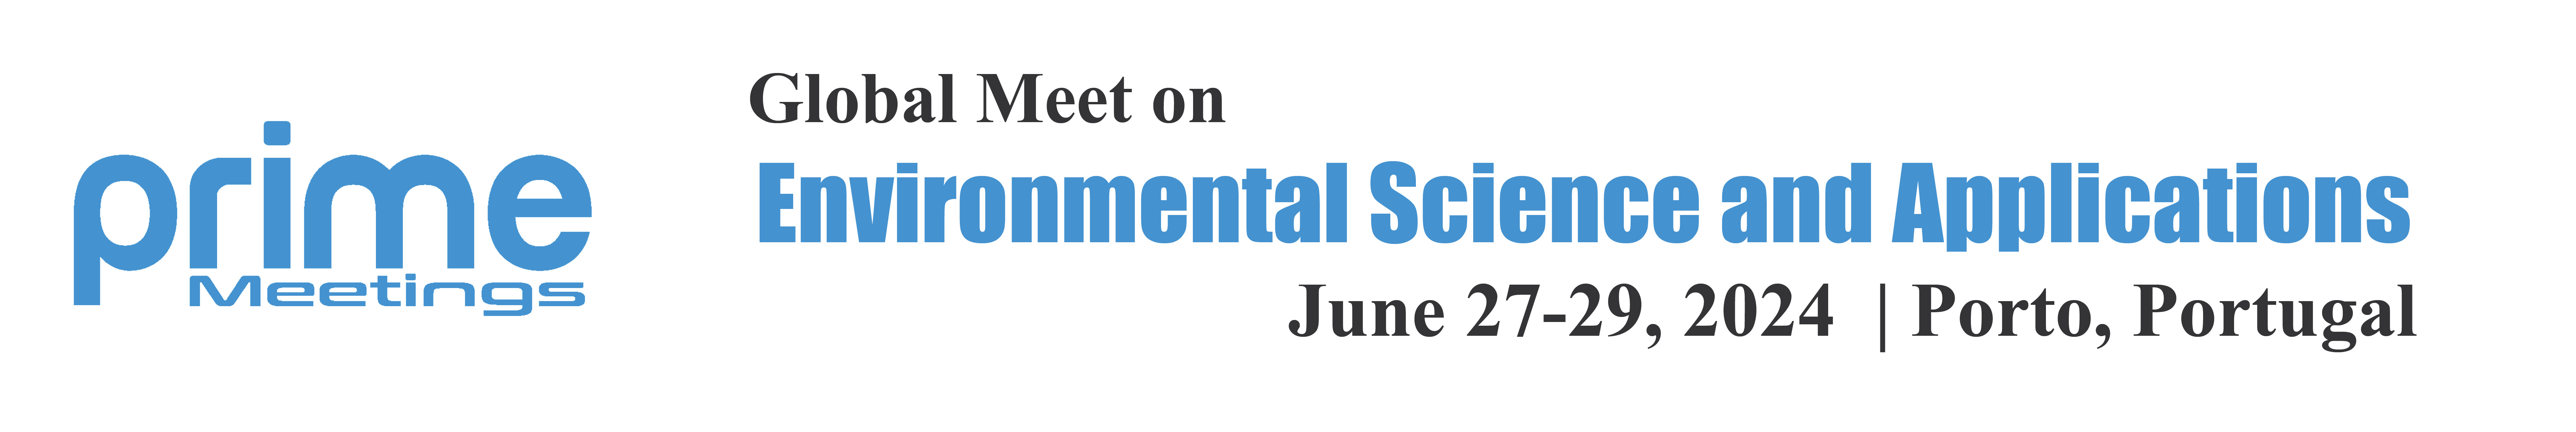 Global Meet on Environmental Science and Applications